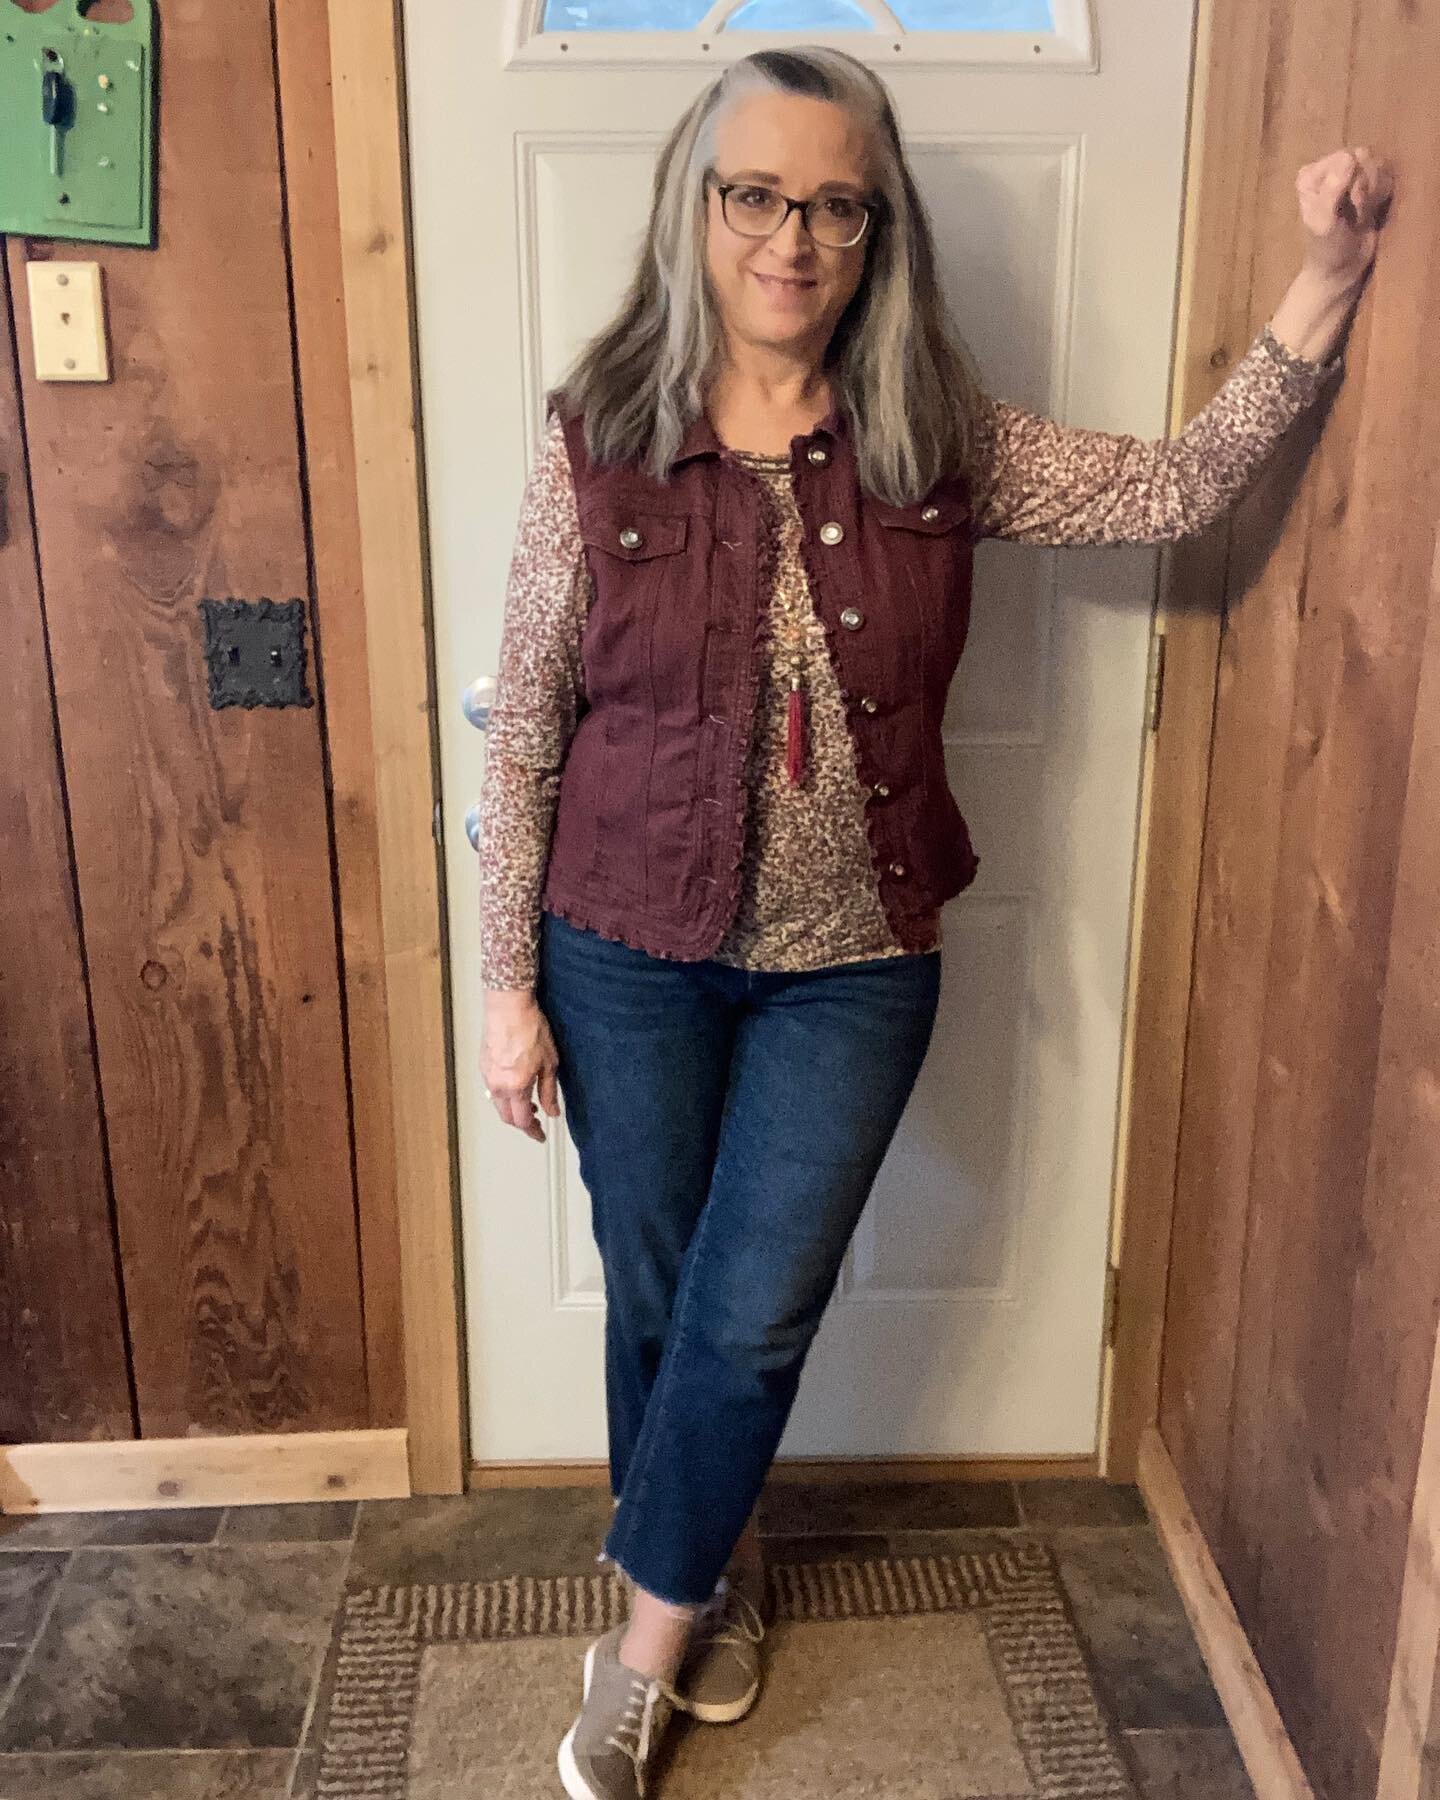 This week&rsquo;s #mismatchmay style prompts are Vests, Layering, Denim, Thrift Flips and Upcycles with our hosts @crafty_thrifting and @prelovedlotta . I love to layer, and our weather so far is perfect for these layers. My burgundy colored #christo